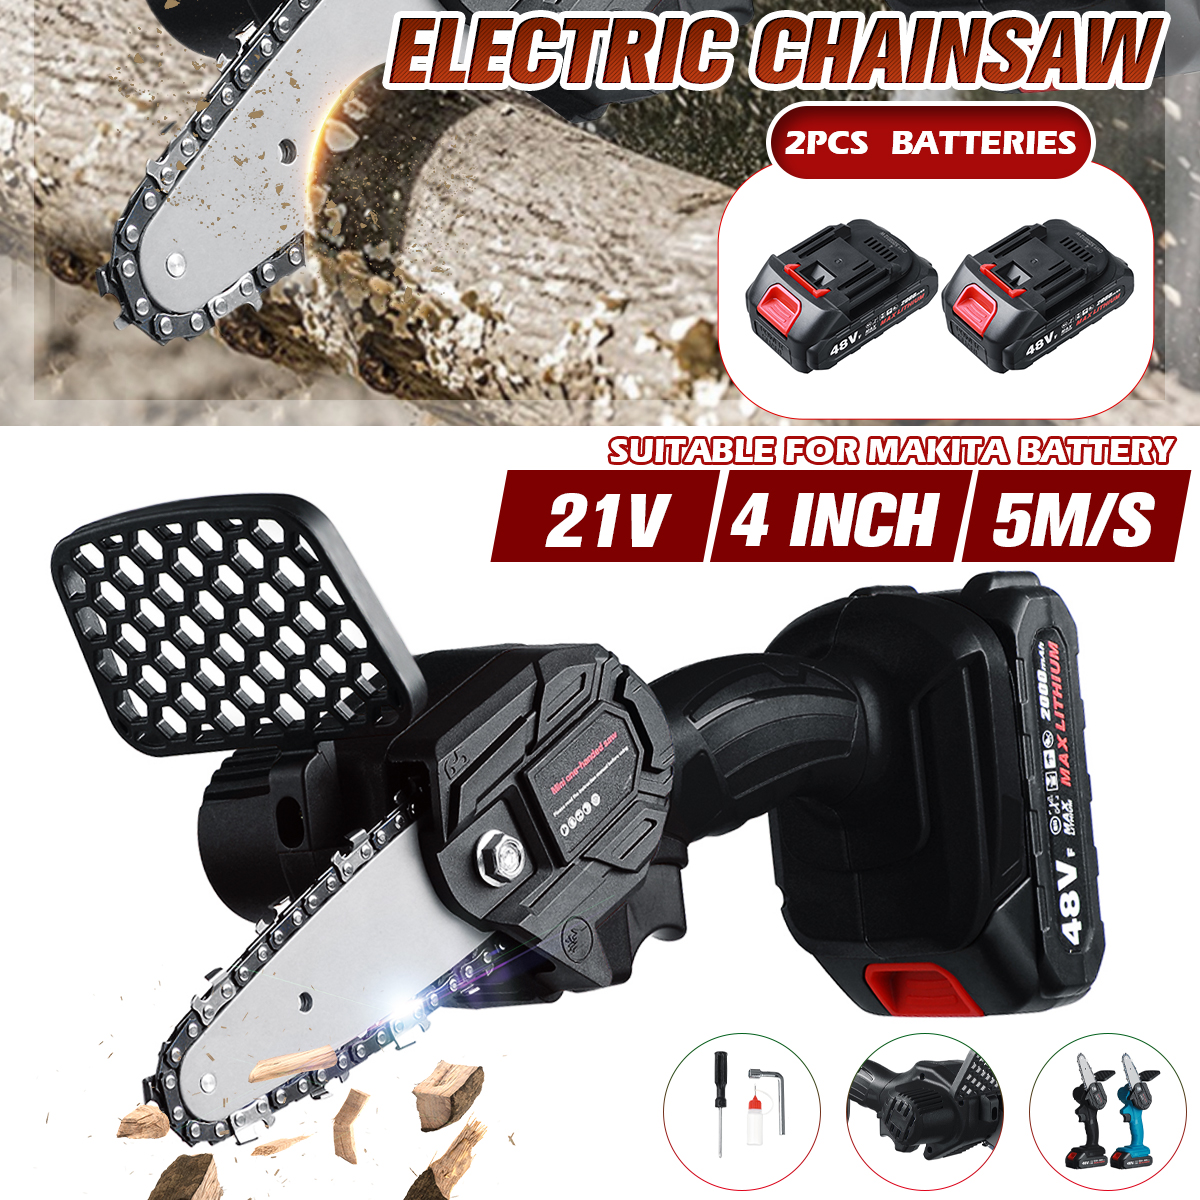 21V-4quot-Cordless-Electric-Chain-Saw-Rechargeable-Woodworking-Cutting-Saw-W-2pcs-Battery-1792669-1